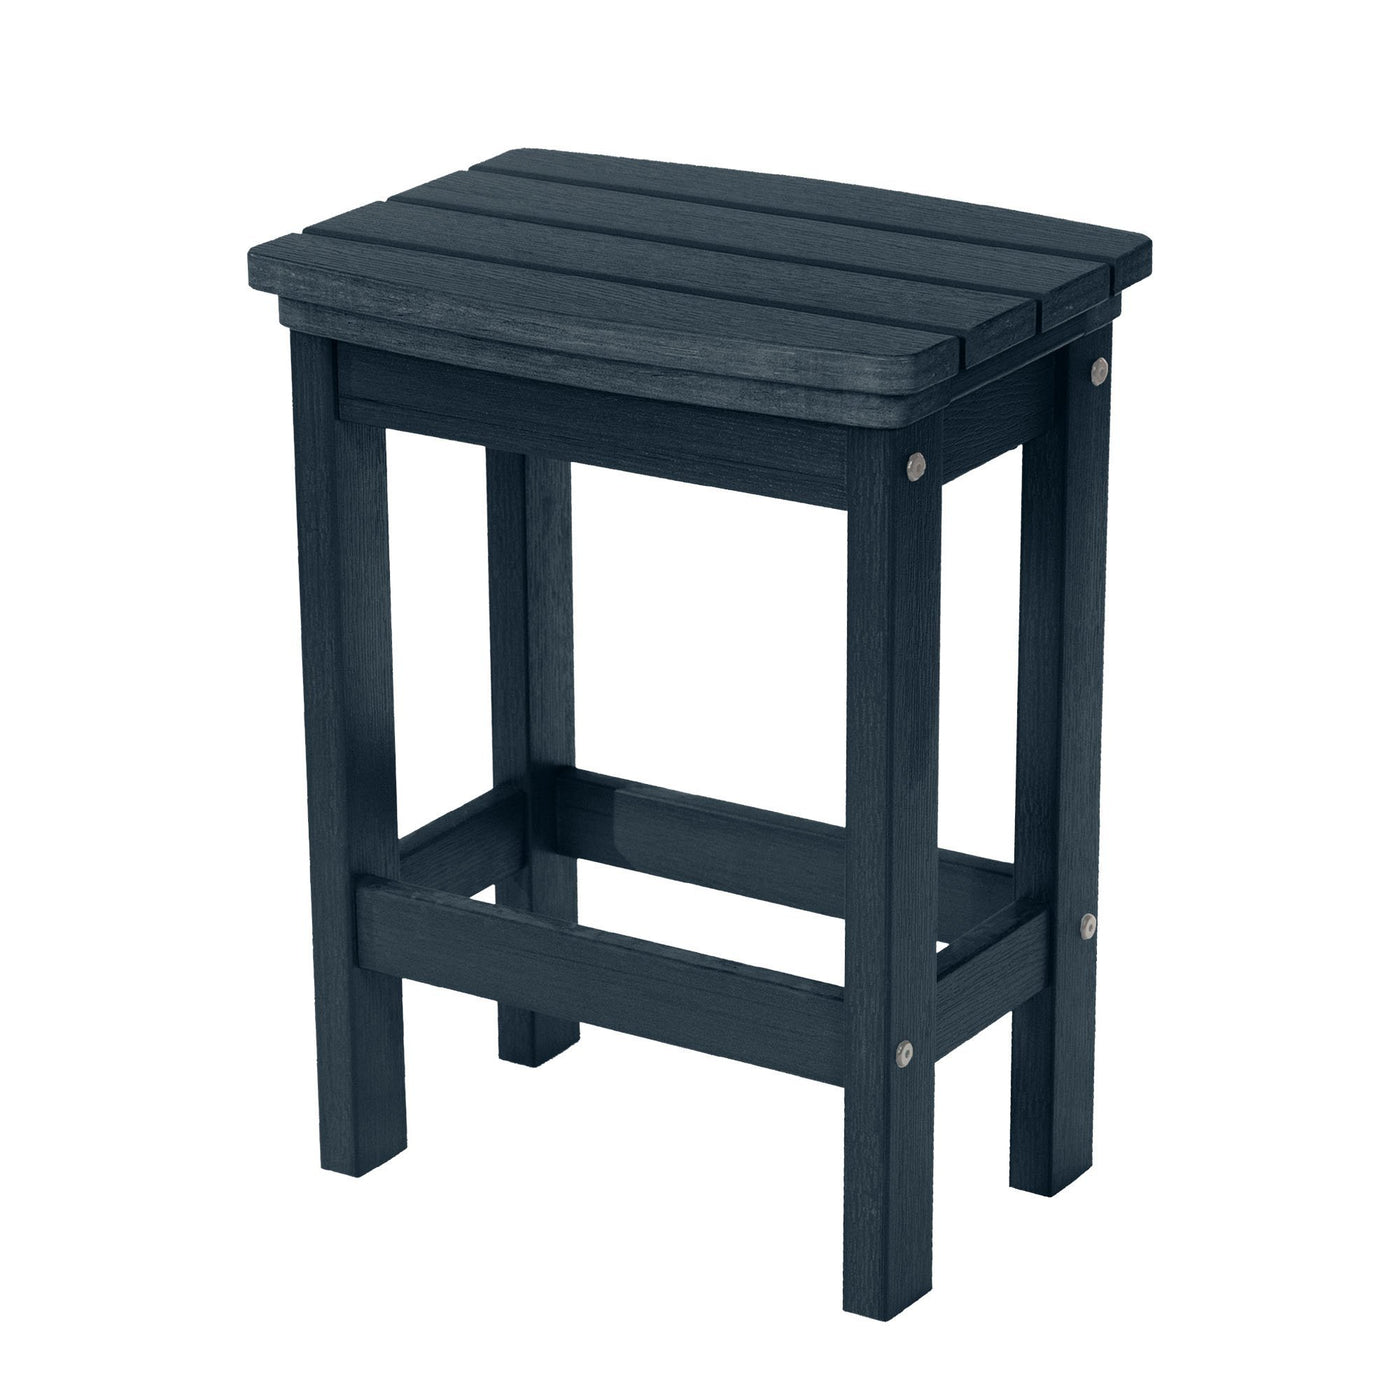 Back view of Lehigh counter height stool in Federal Blue